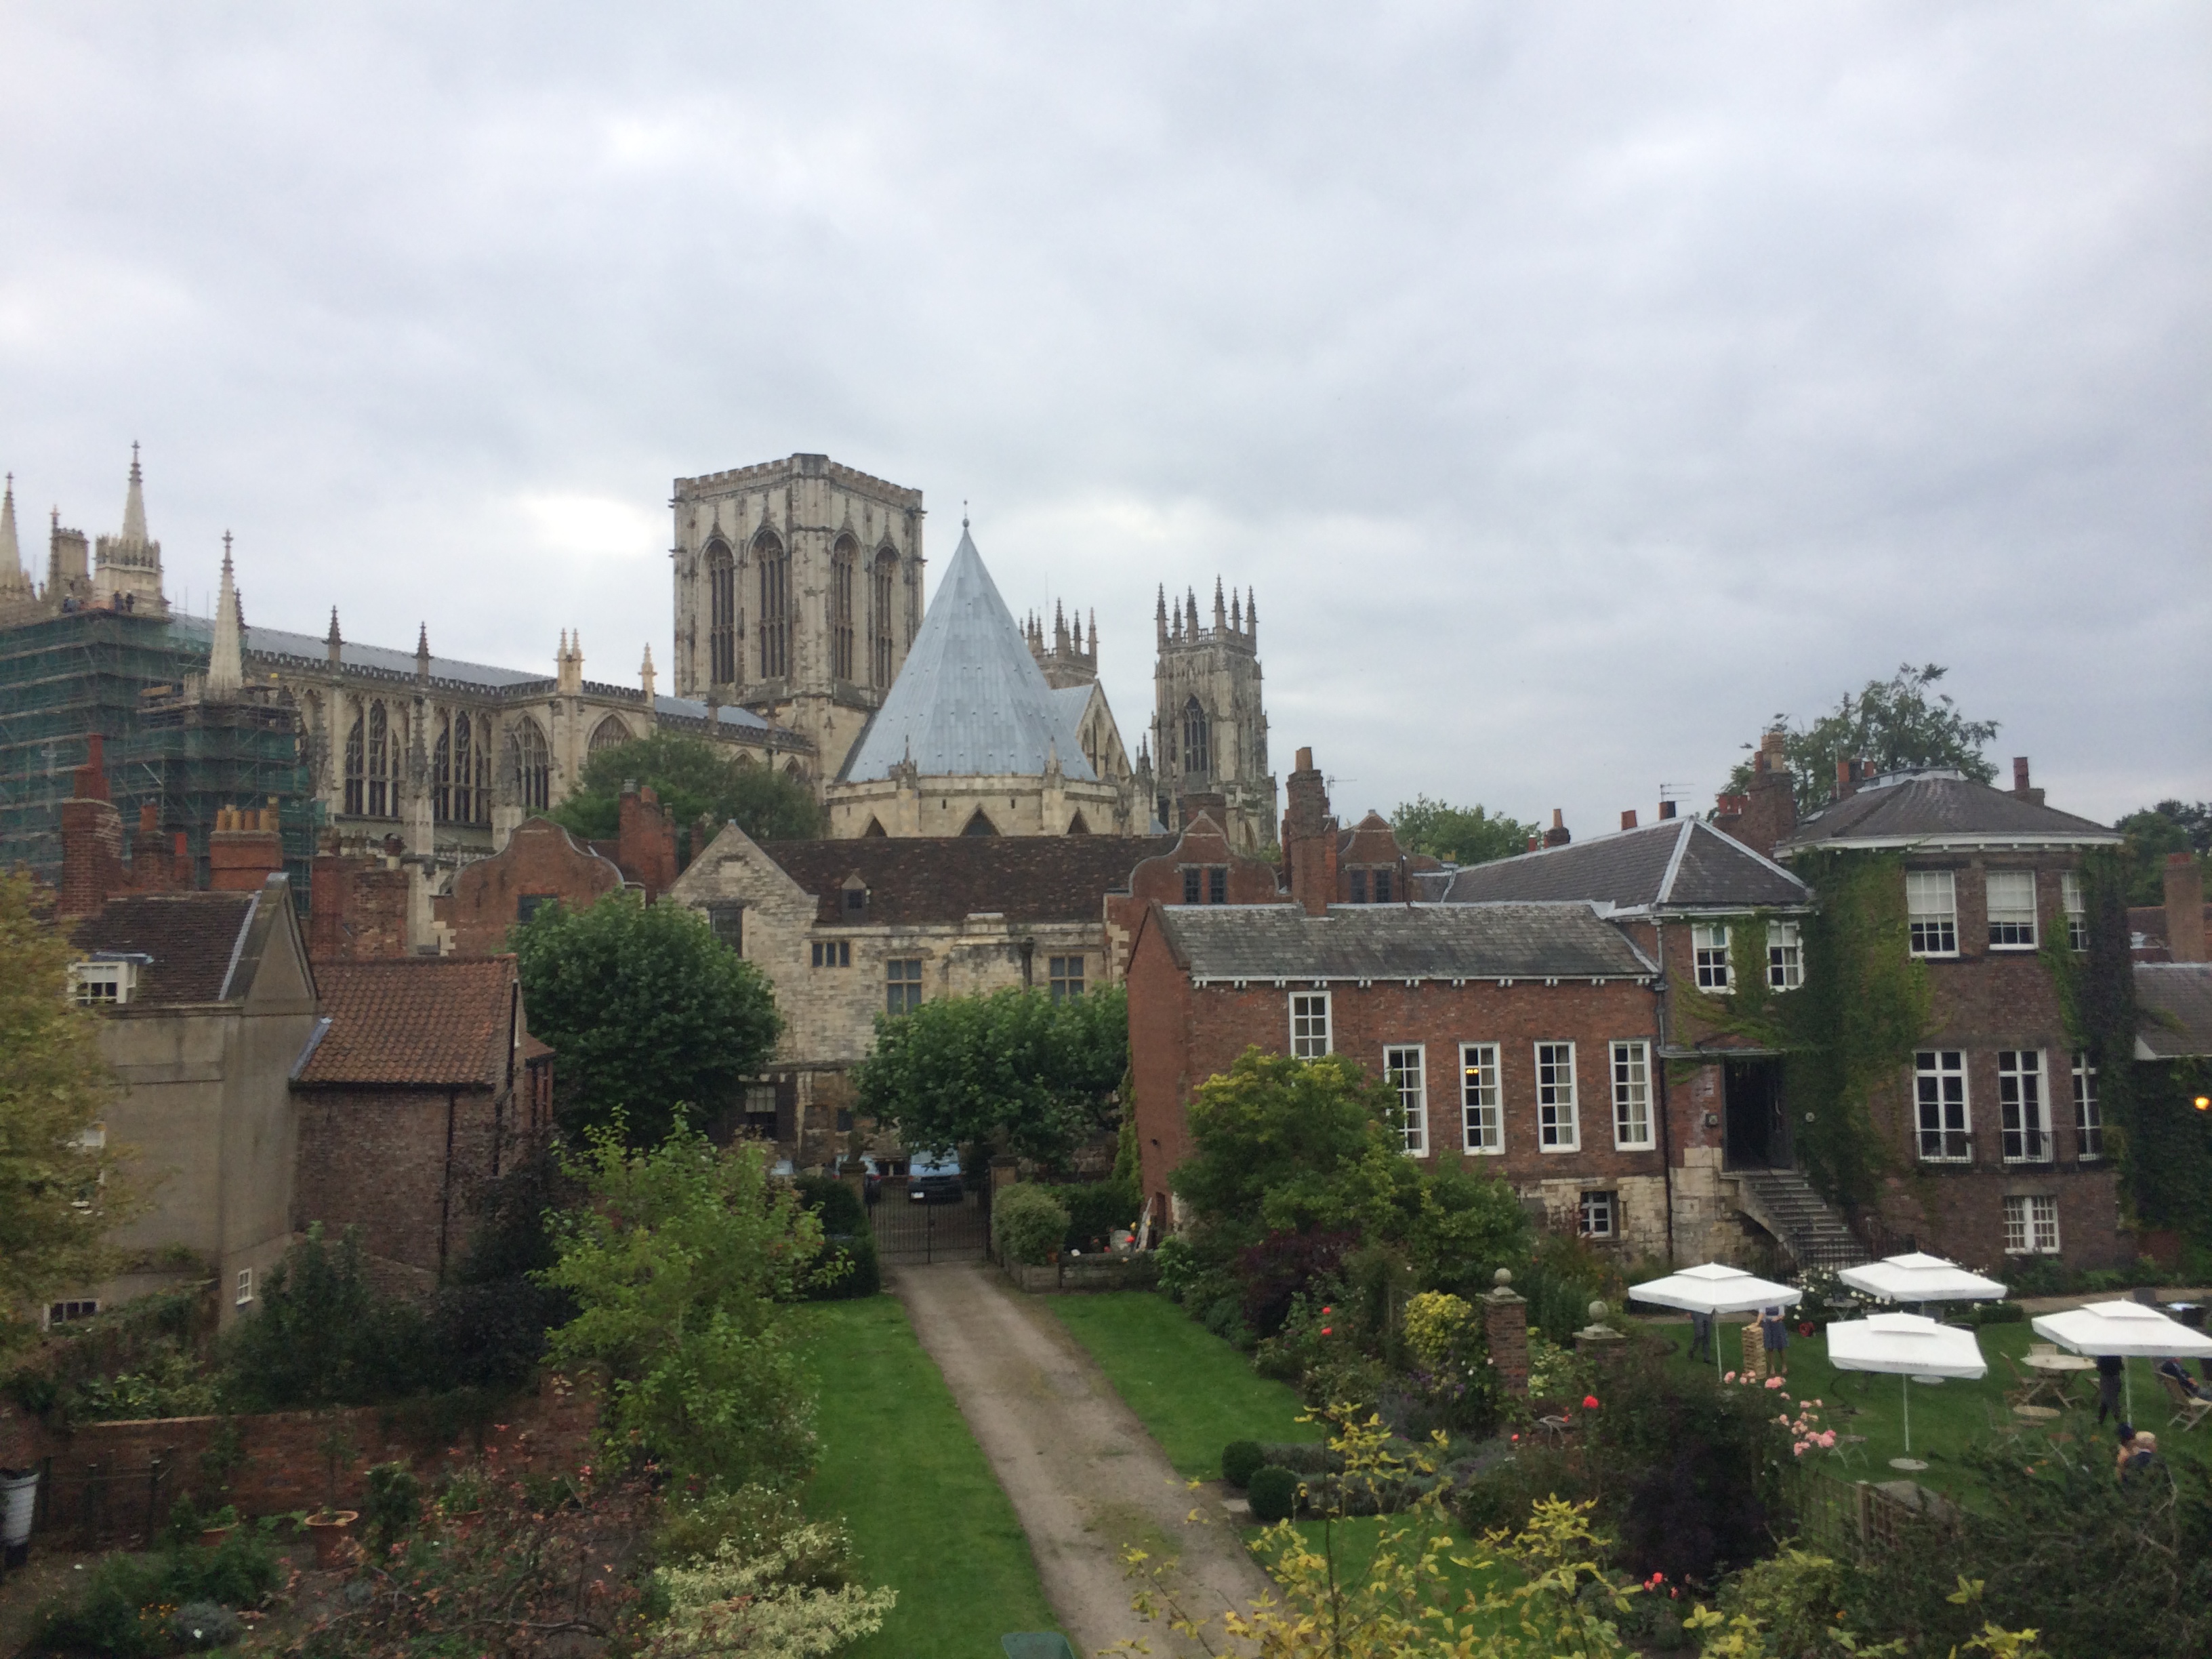 View of York Minster taken from the City Walls with Grays Court on the right, Treasurers House and The Chapter House centre in front of the Central Tower of the Minster